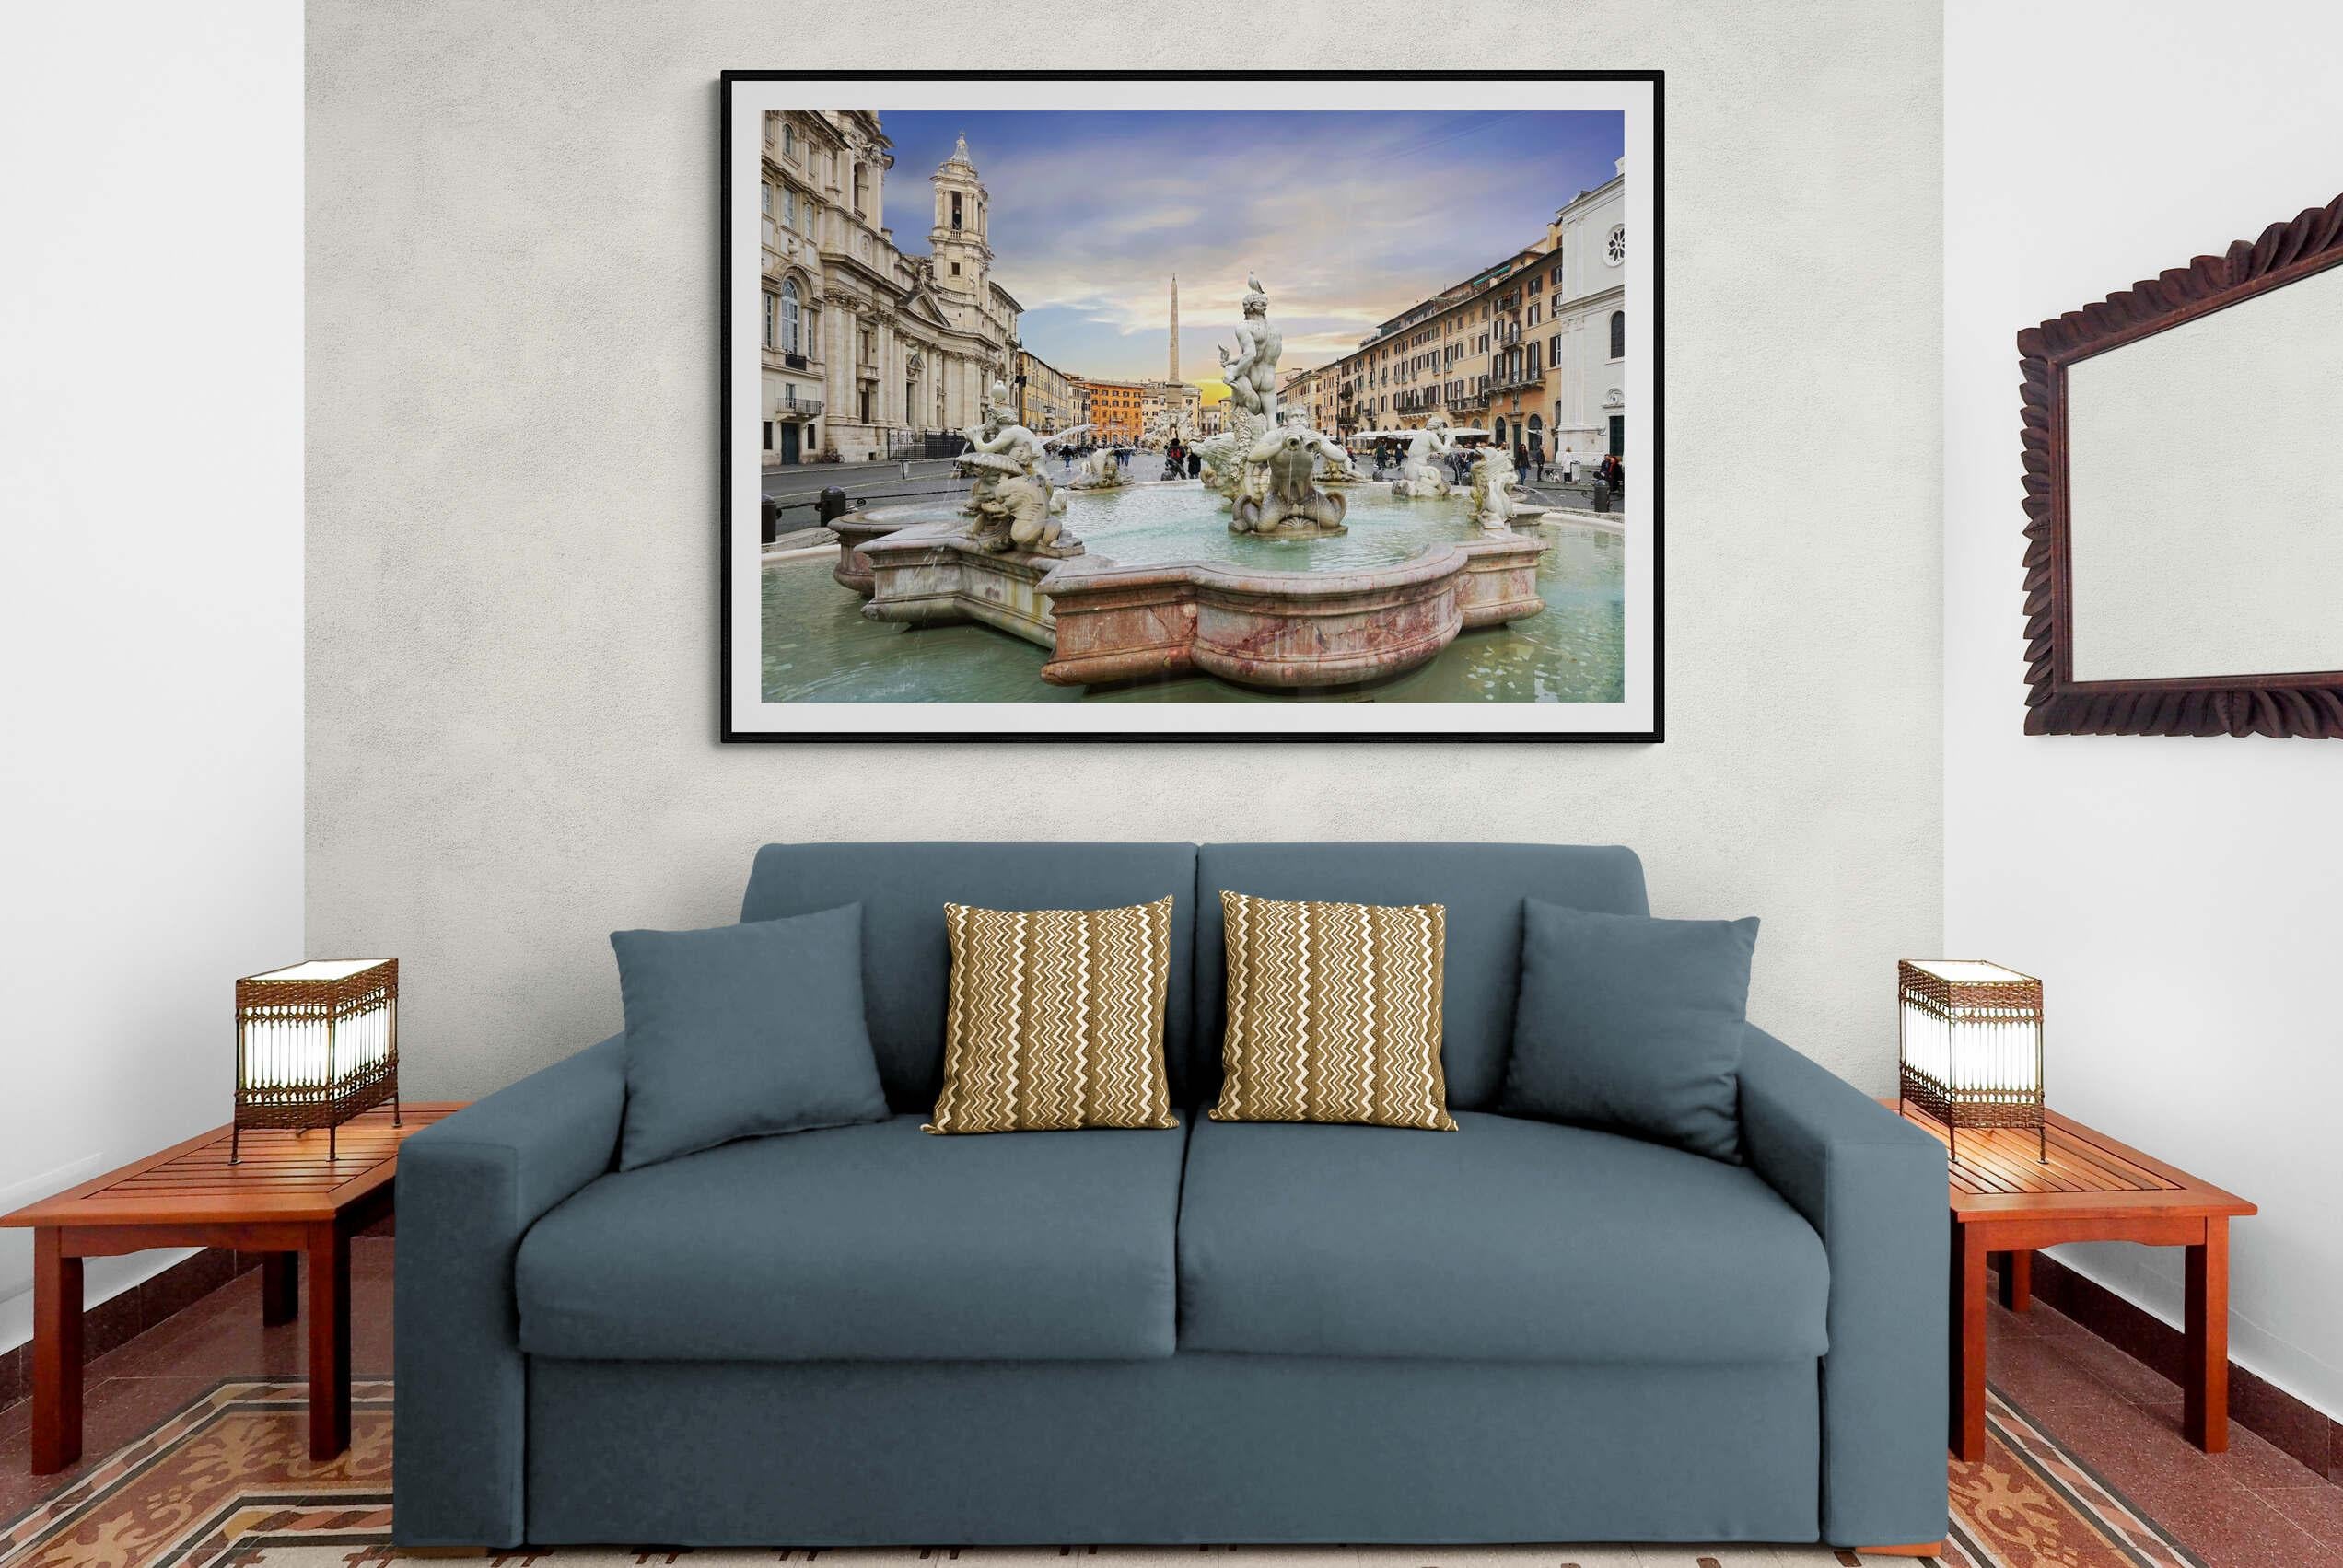 The Piazza Navona, Roma - Italy 2019 - Full Framed Panoramic Color Photography For Sale 3